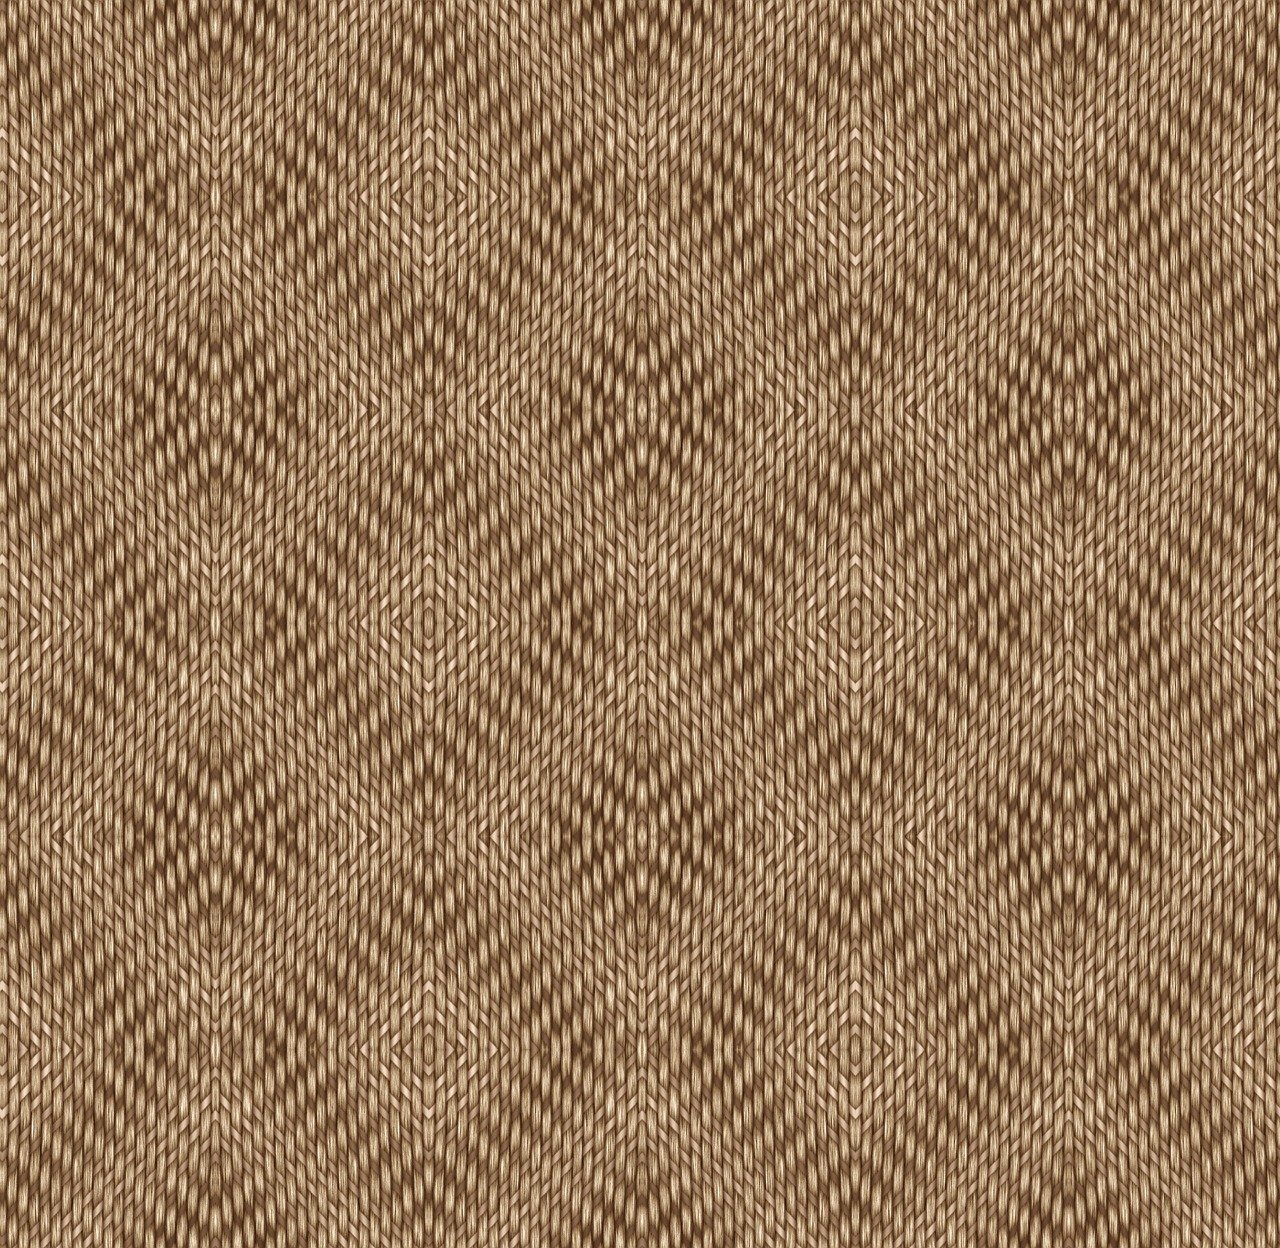 a brown fabric with a herringle pattern, a digital rendering, abstract illusionism, seamless wooden texture, very sharp photo